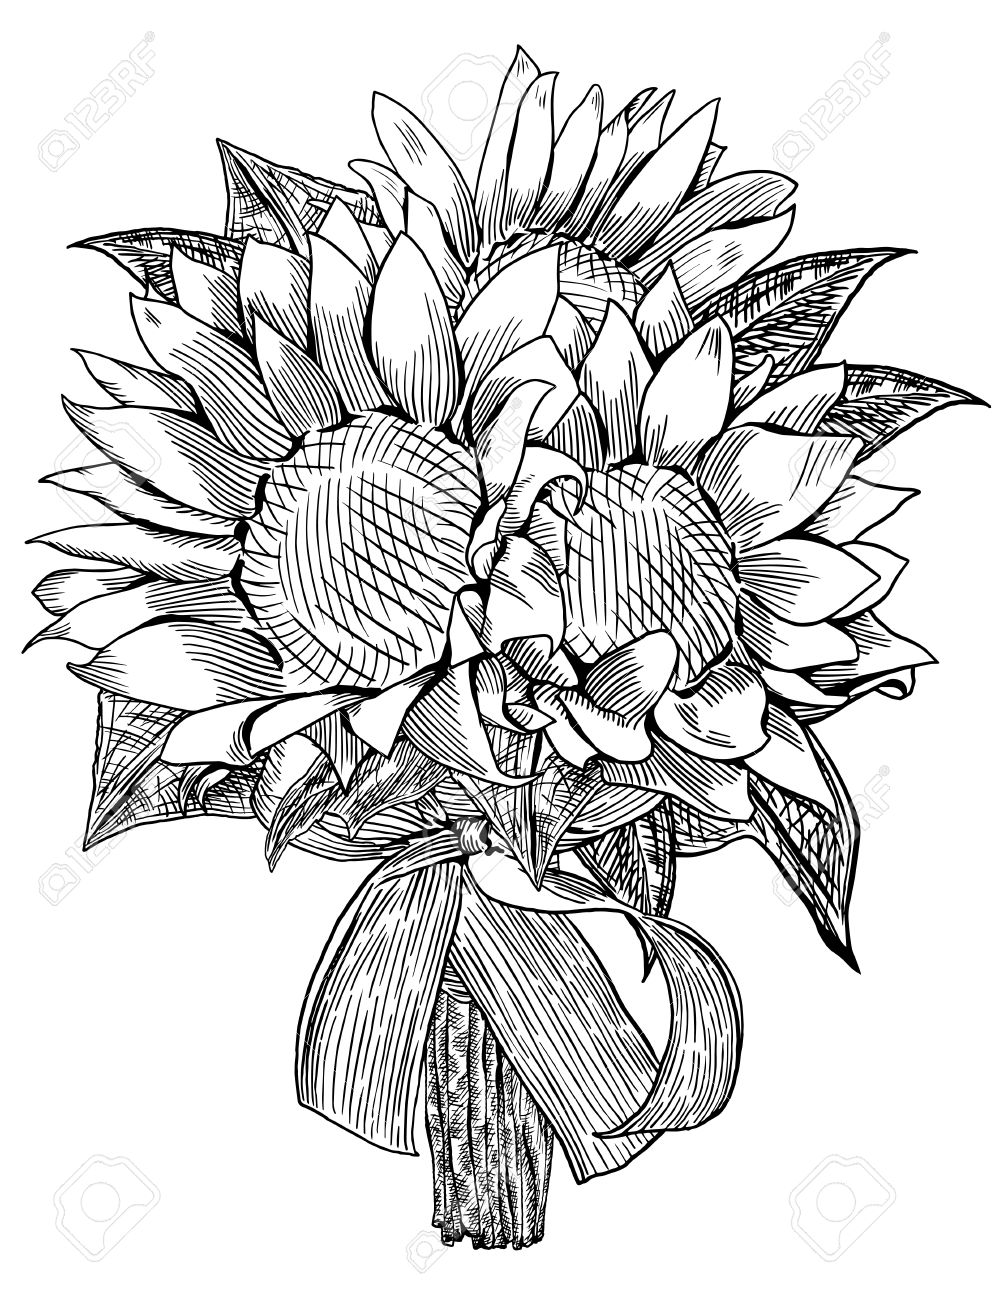 Download Wedding Bouquet Drawing at GetDrawings.com | Free for ...